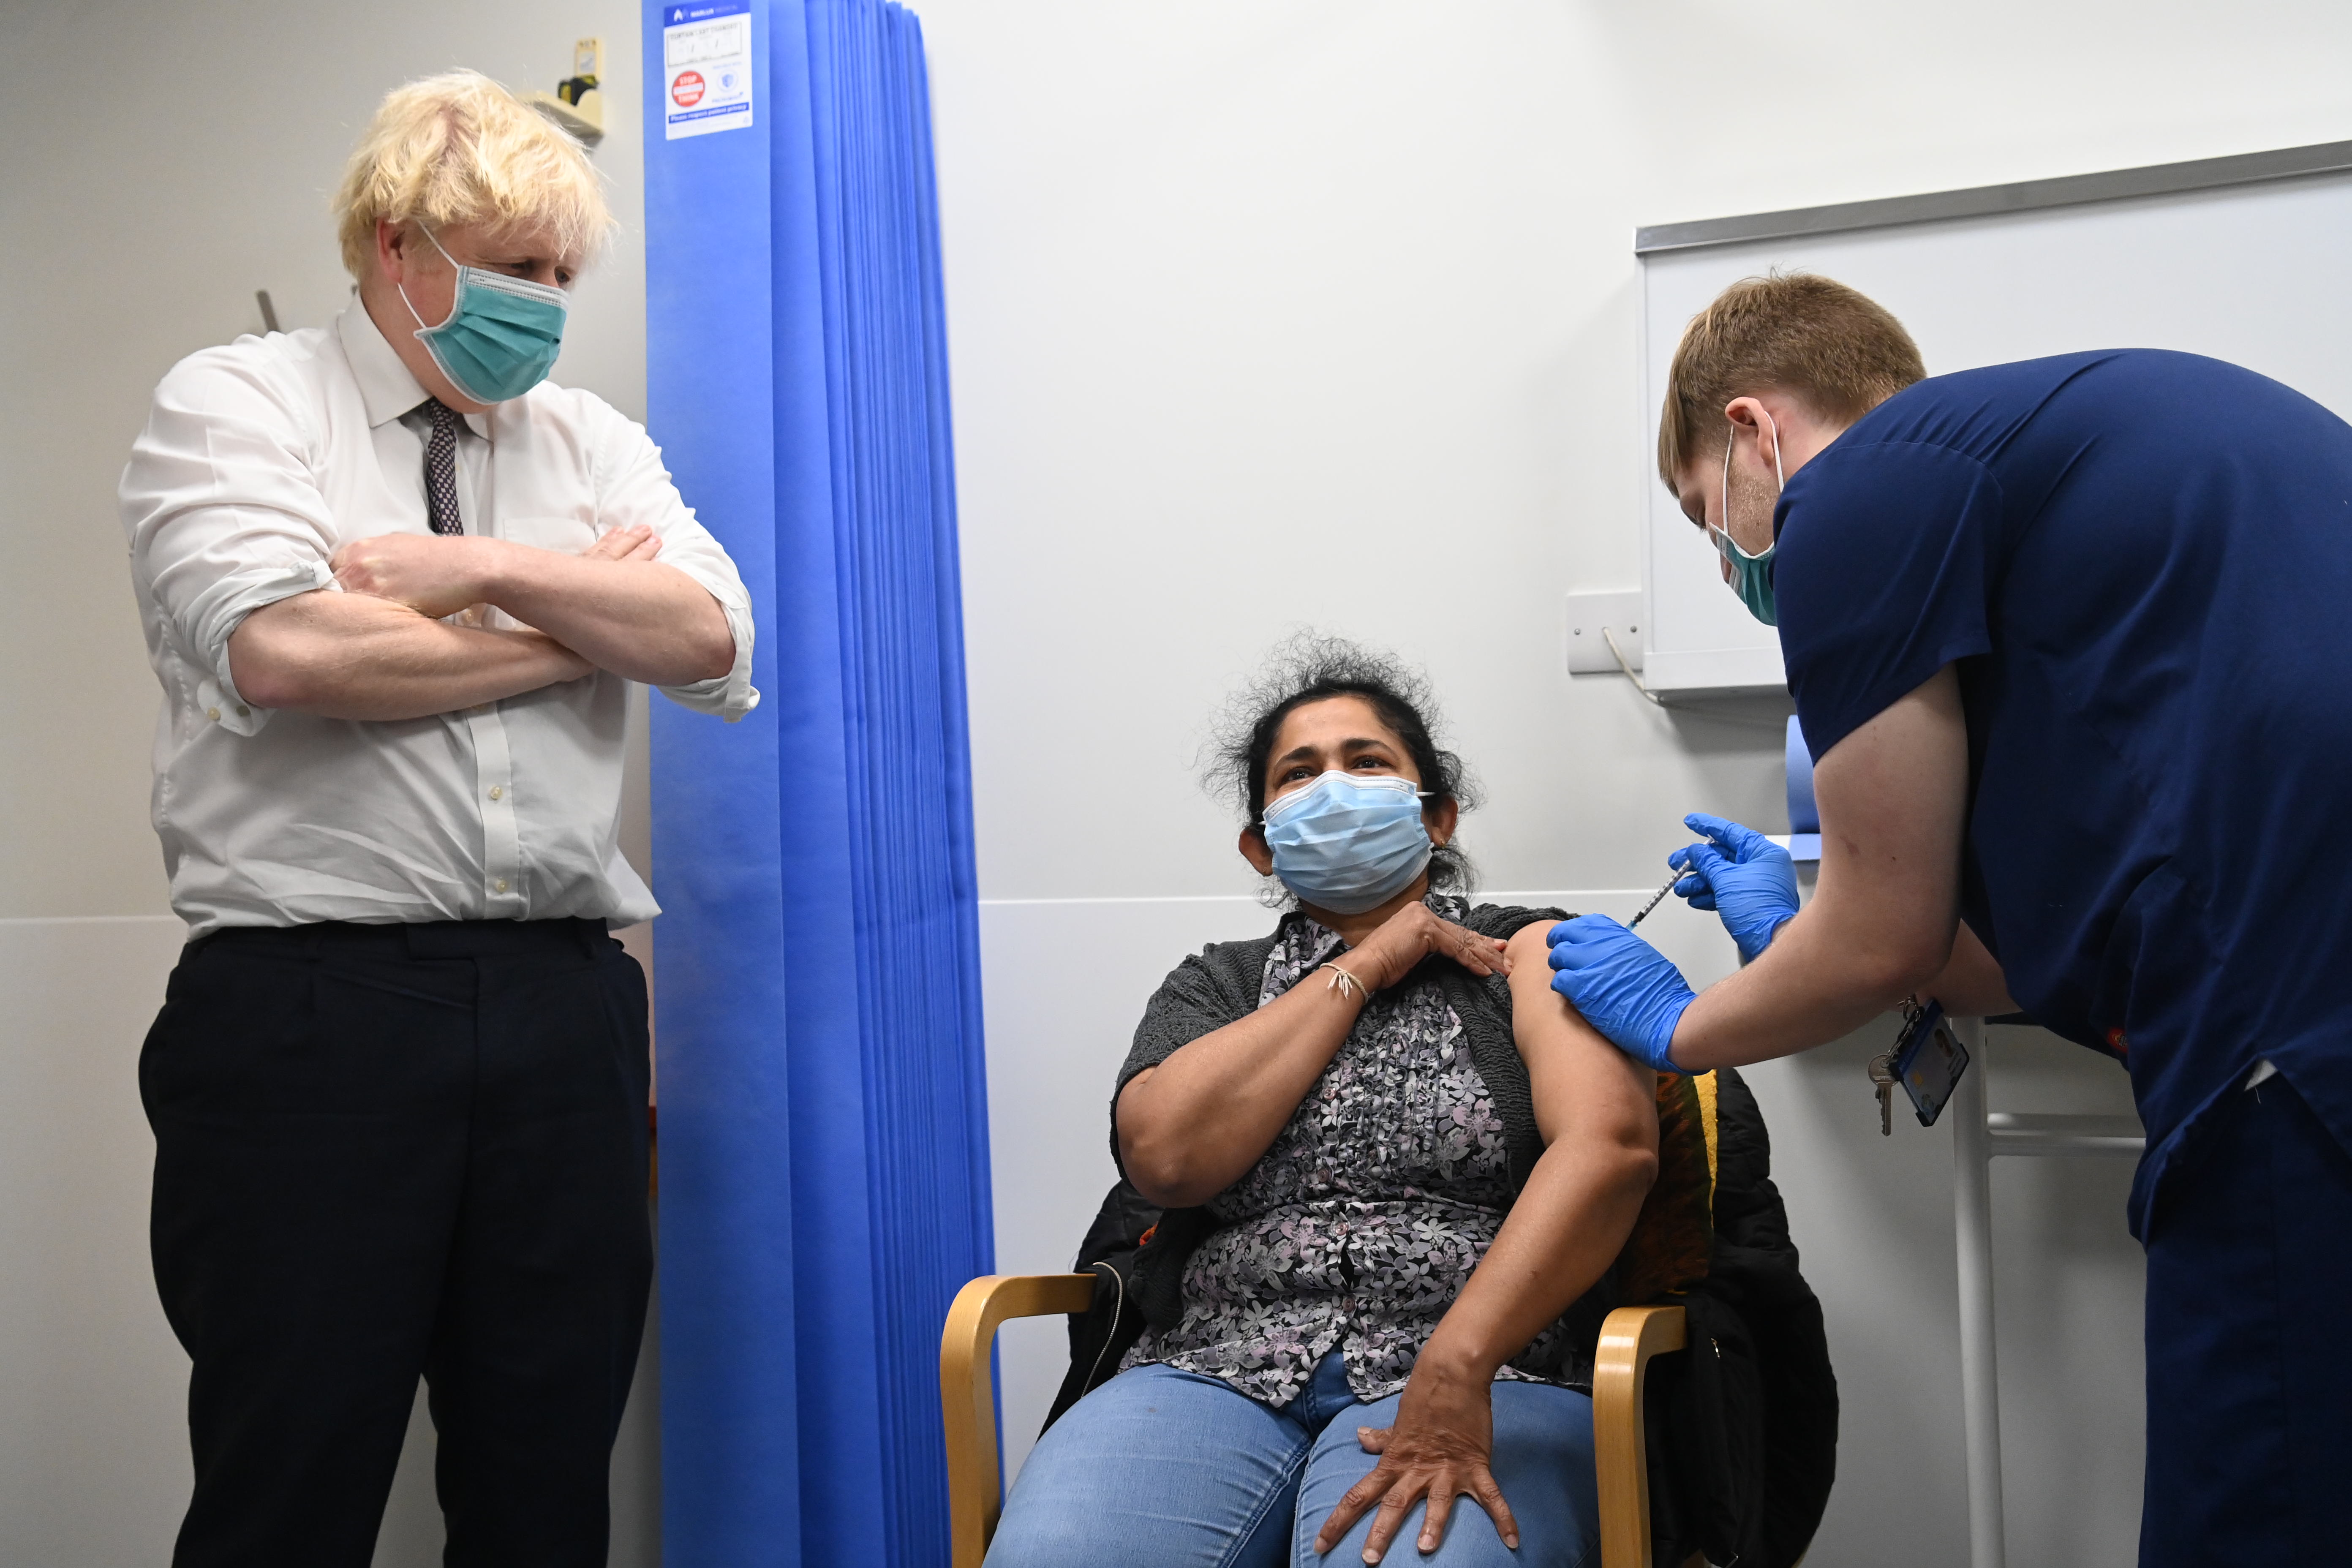 British Prime Minister Boris Johnson visits Lordship Lane Primary Care Centre on November 30, 2021 in London, England. During the visit the PM will meet staff and see people receiving their coronavirus (COVID-19) vaccine booster jab. 